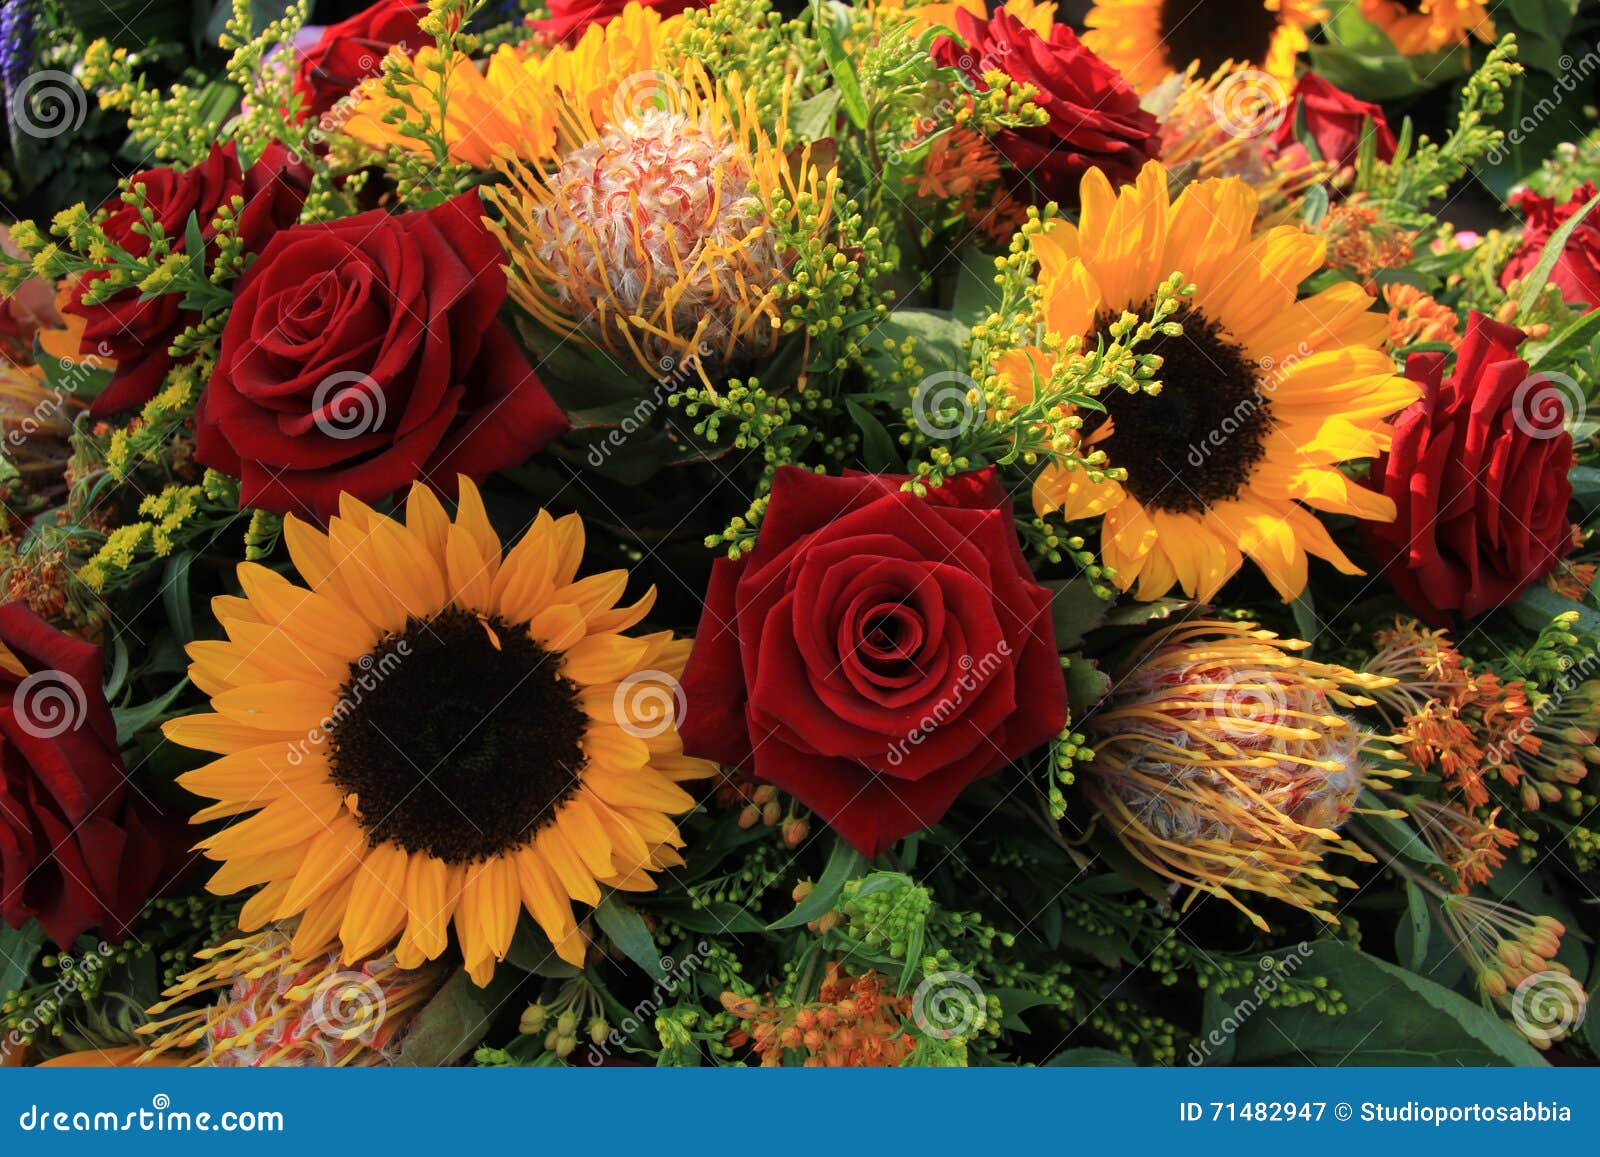 Download Sunflowers and roses stock image. Image of flower ...